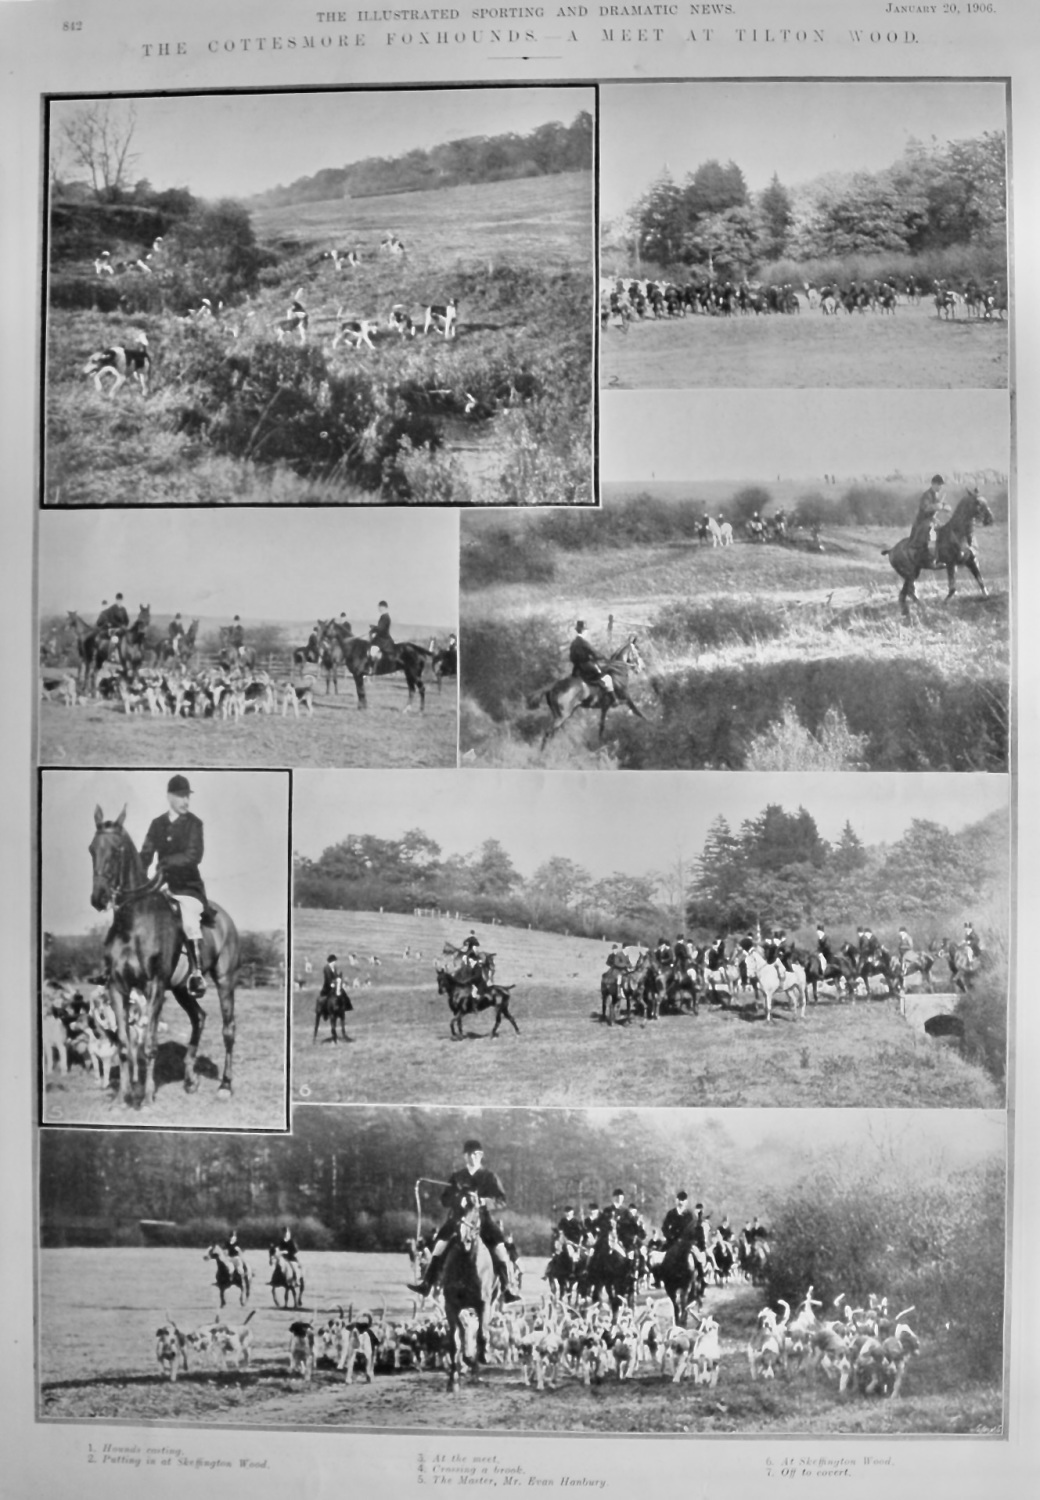 The Cottesmore Foxhounds.- A Meet at Tilton Wood.  1906.